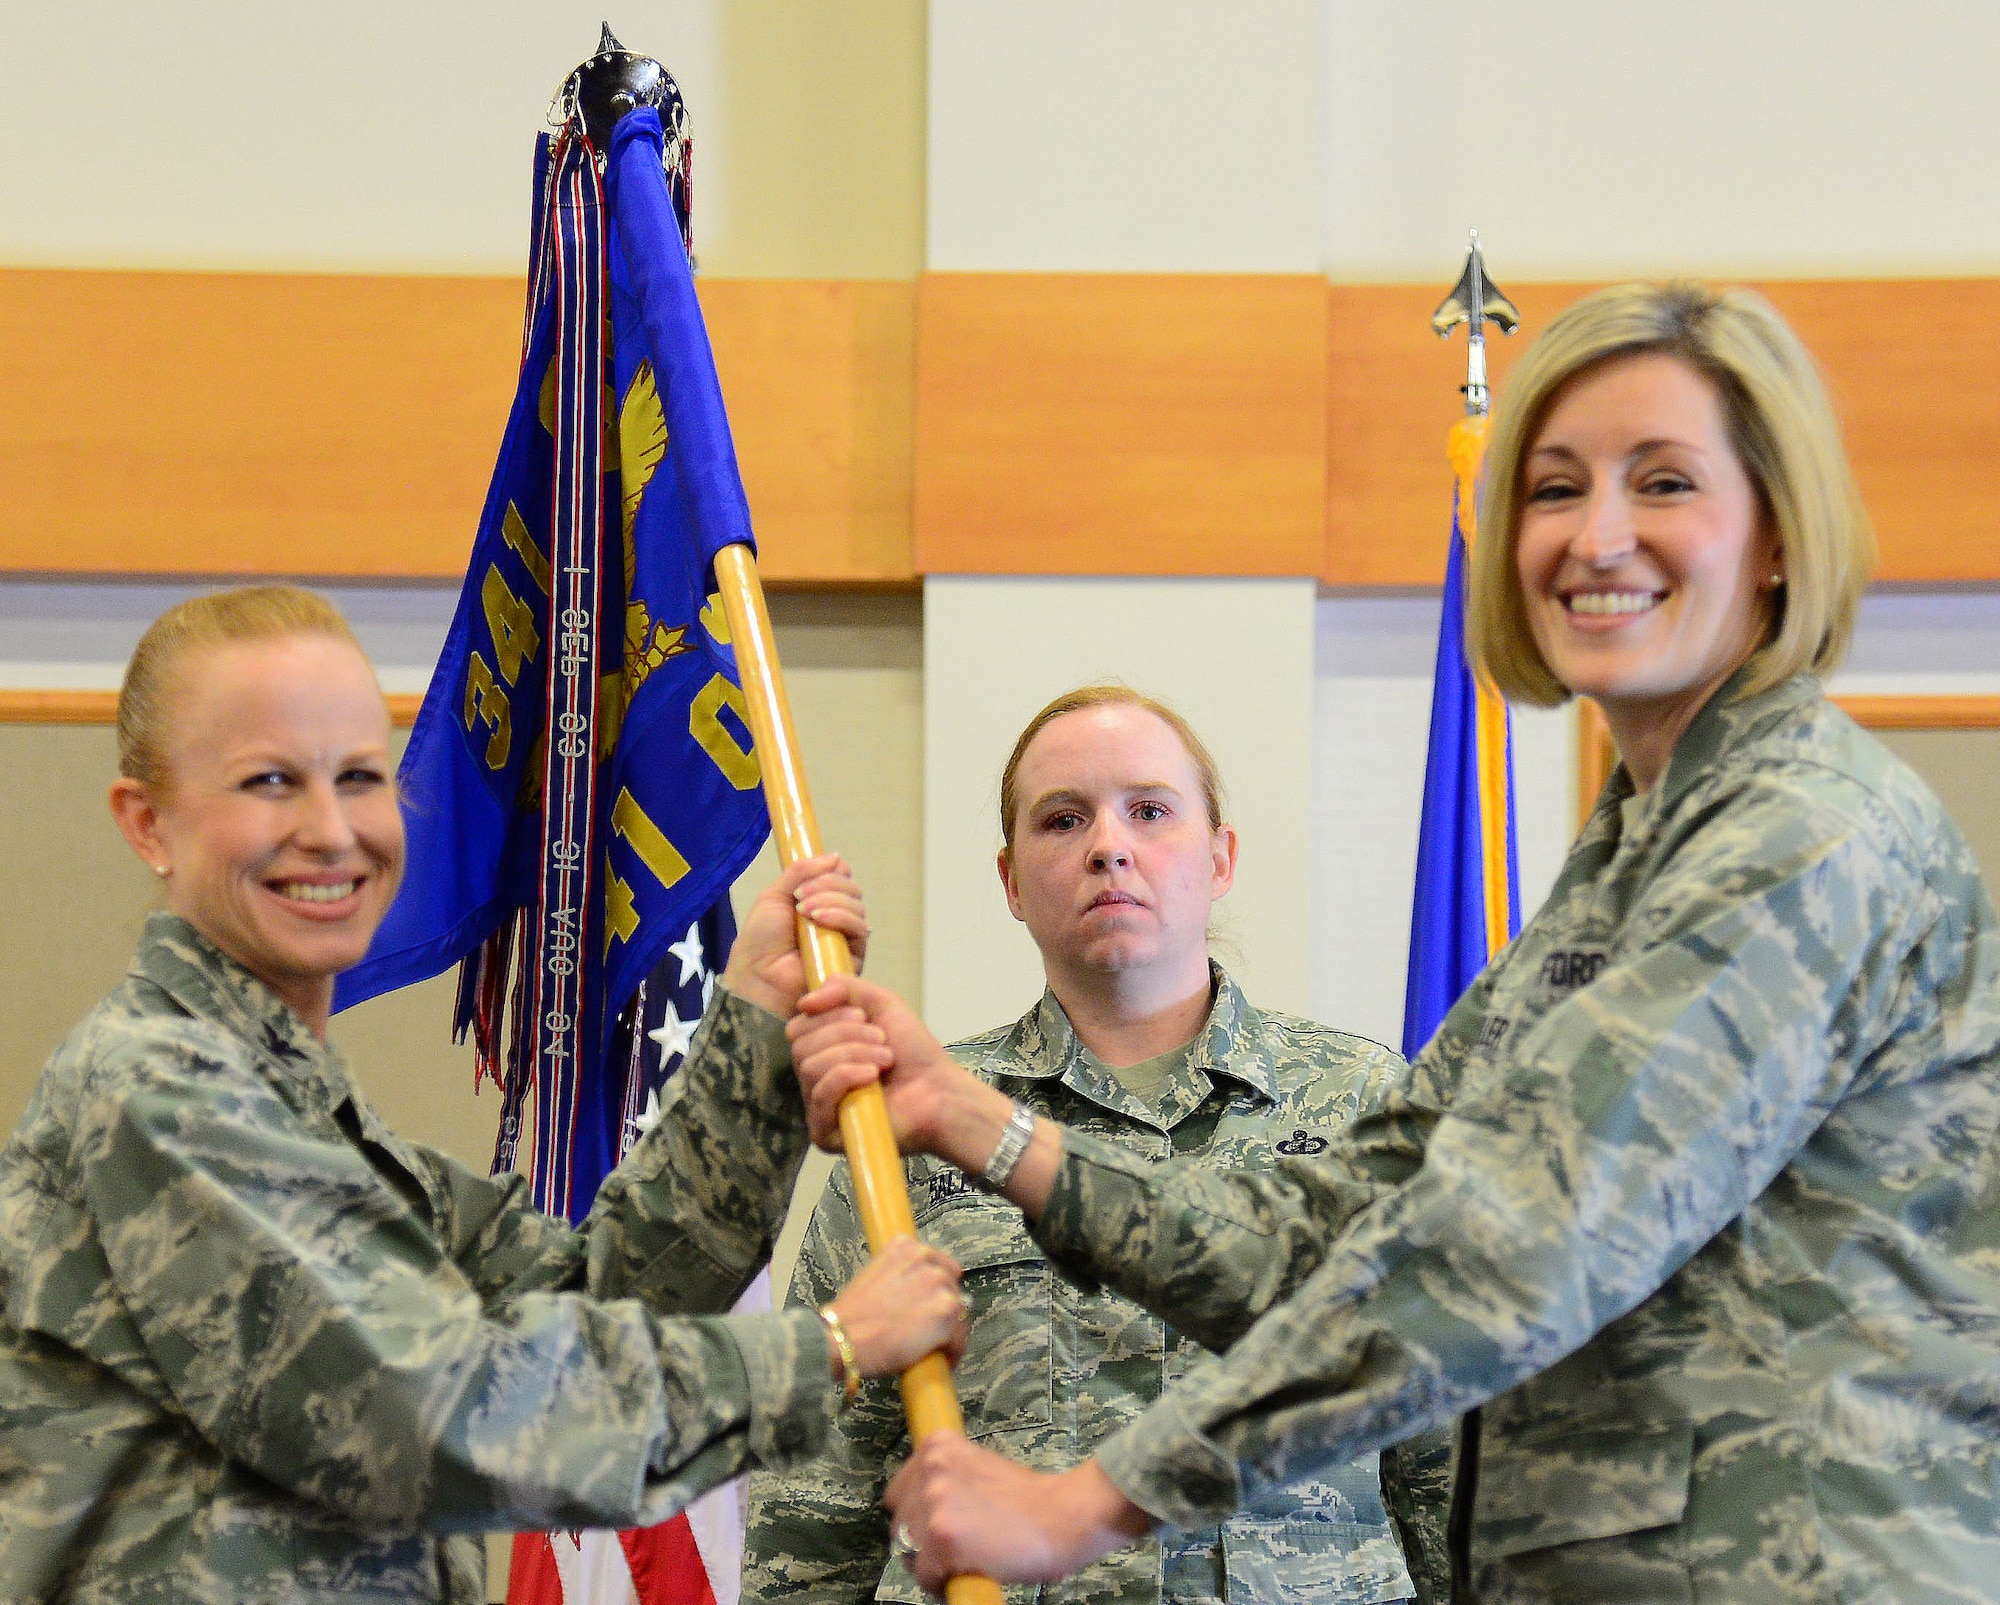 Lt. Col. Elizabeth Keller, right, accepts command of the 341st Operations Support Squadron from Col. Anita Feugate Opperman, 341st Operations Group commander, June 22, at Malmstrom Air Force Base, Mont. Master Sgt. Ruth Salender, 341st OG first sergeant, looks on. (U.S. Air Force photo/Senior Airman Magen M. Reeves)